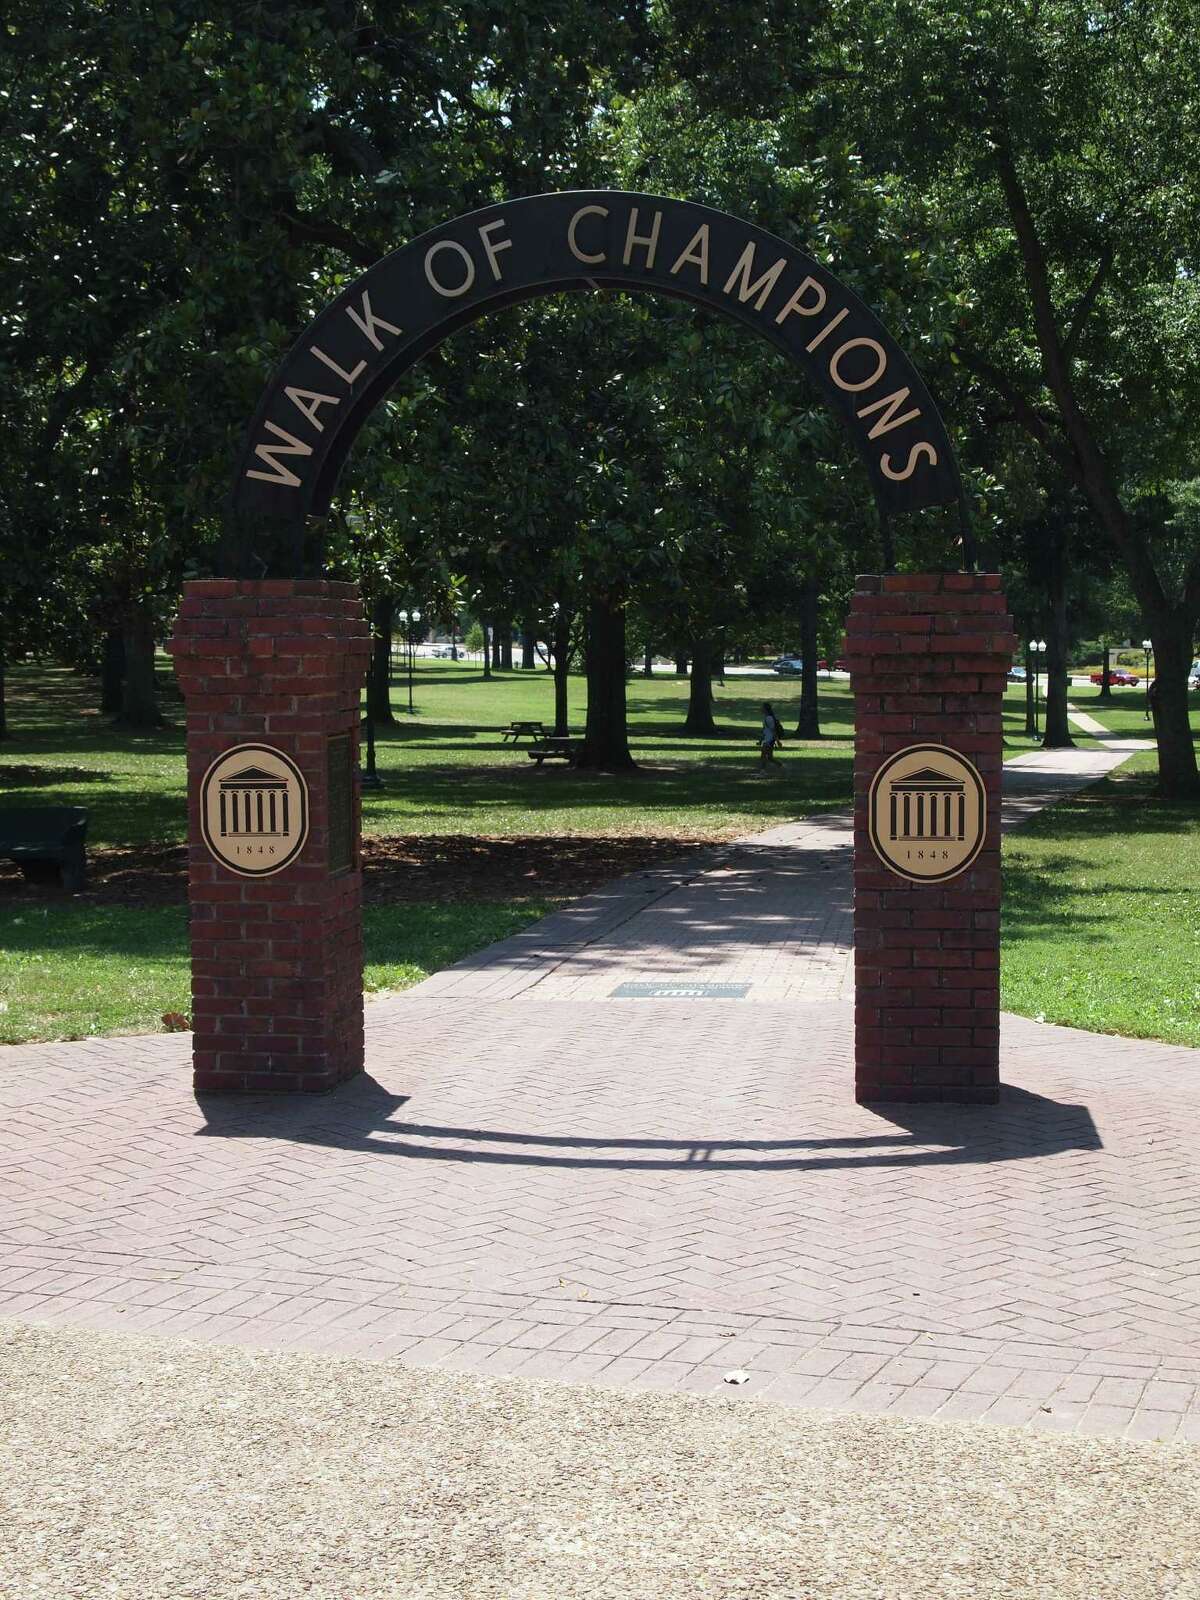 The famed Walk of Champions marks the entrance to the beautiful Grove on the campus of Ole Miss in Oxford, Mississippi.